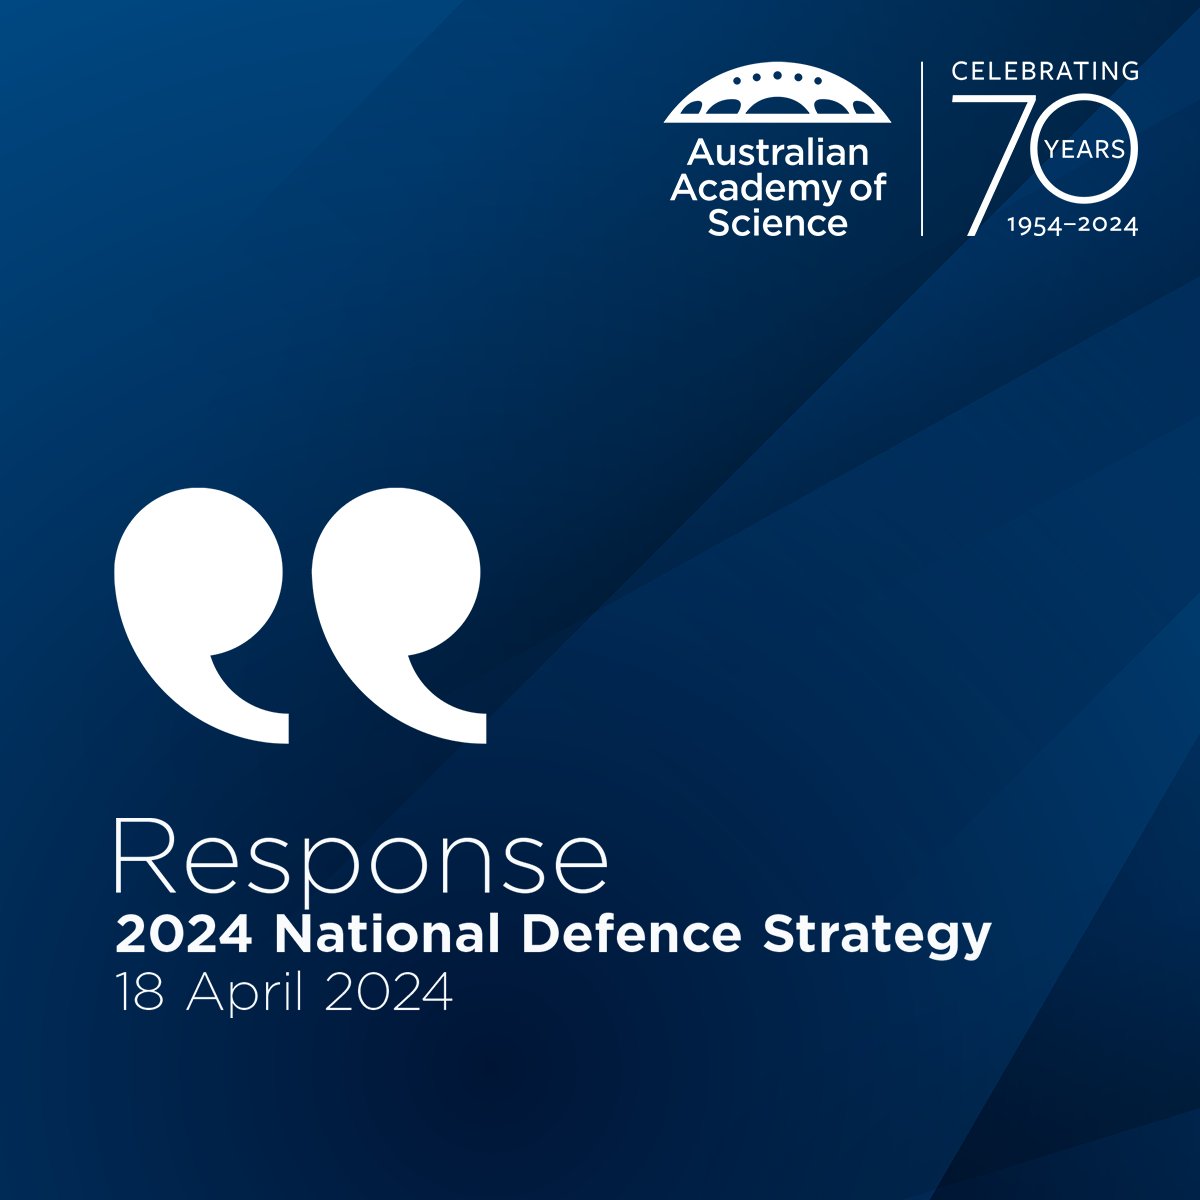 Science capability protects Australia’s national interests, as recognised in the recent release of the Australian Government’s 2024 National Defence Strategy. The strategy acknowledges investment in science and a strong dialogue between the national security and research sectors